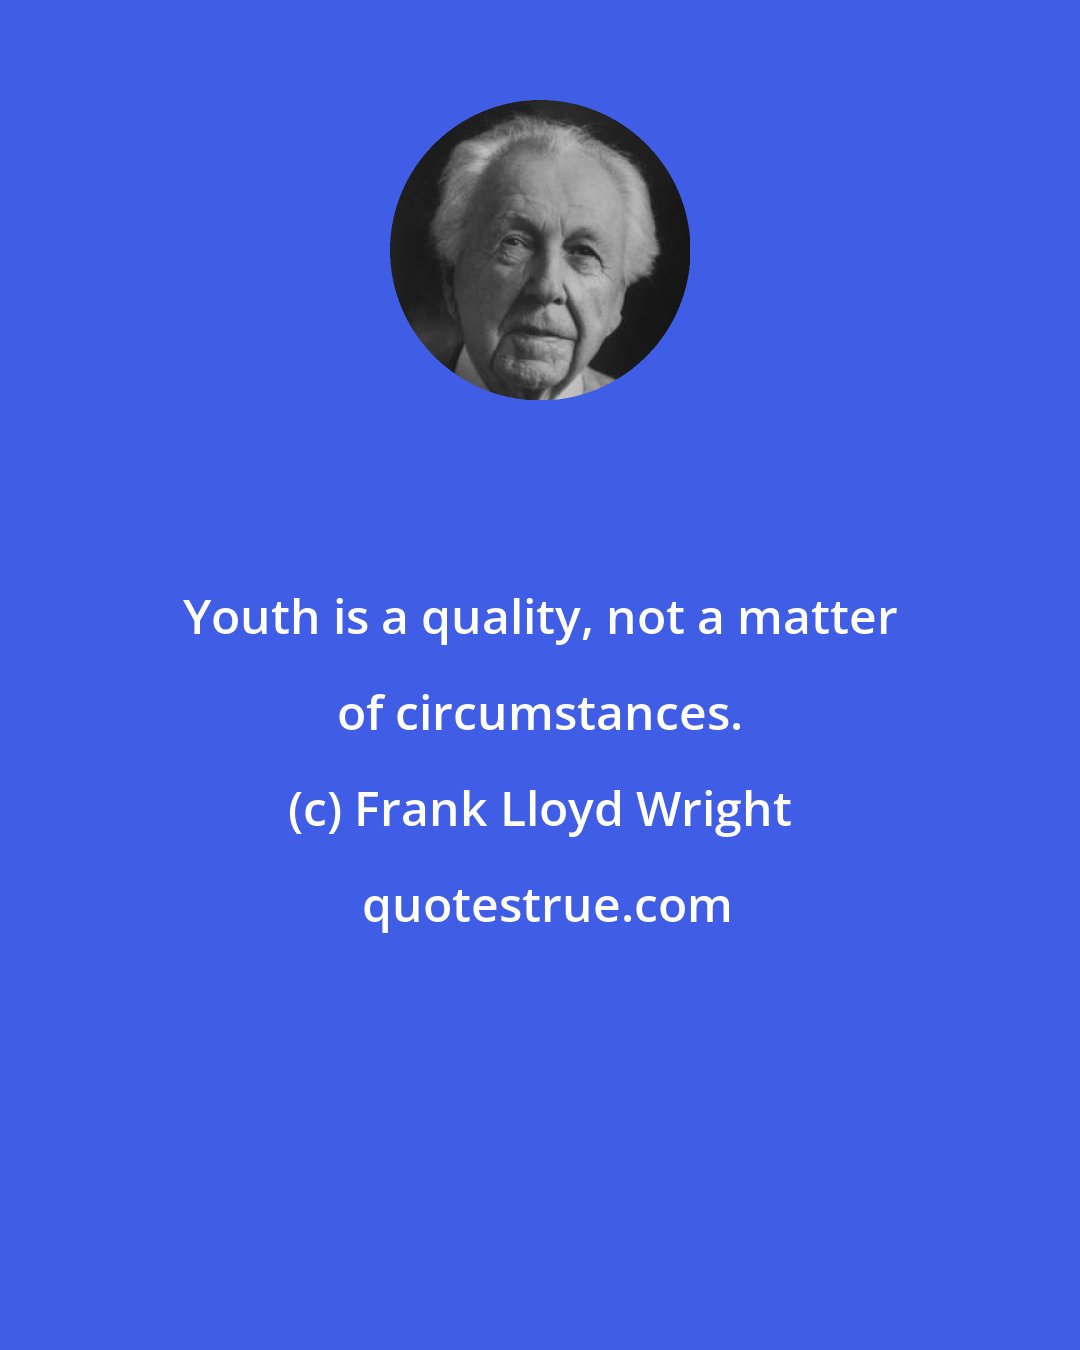 Frank Lloyd Wright: Youth is a quality, not a matter of circumstances.